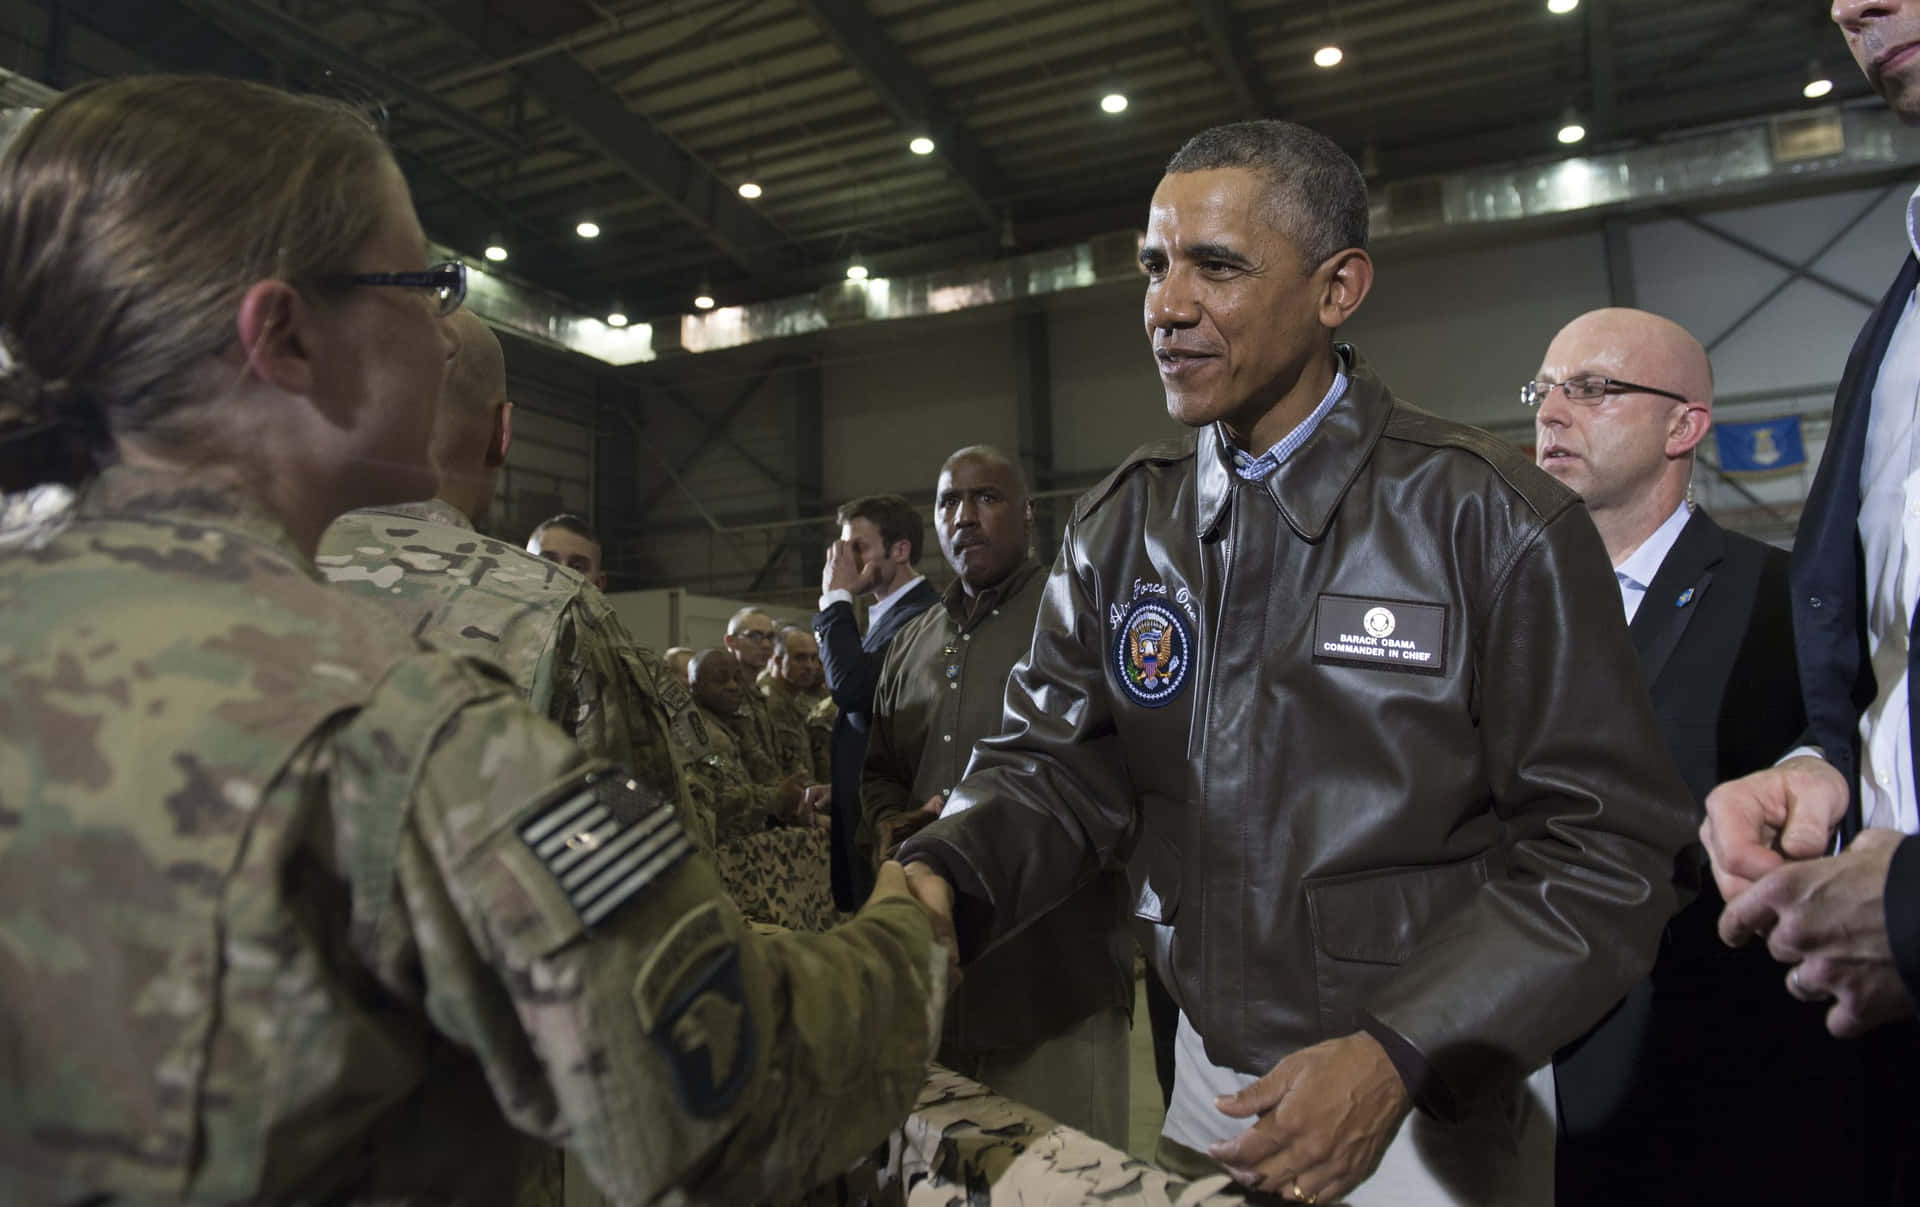 Obama Shakes Hands With A Group Of Soldiers